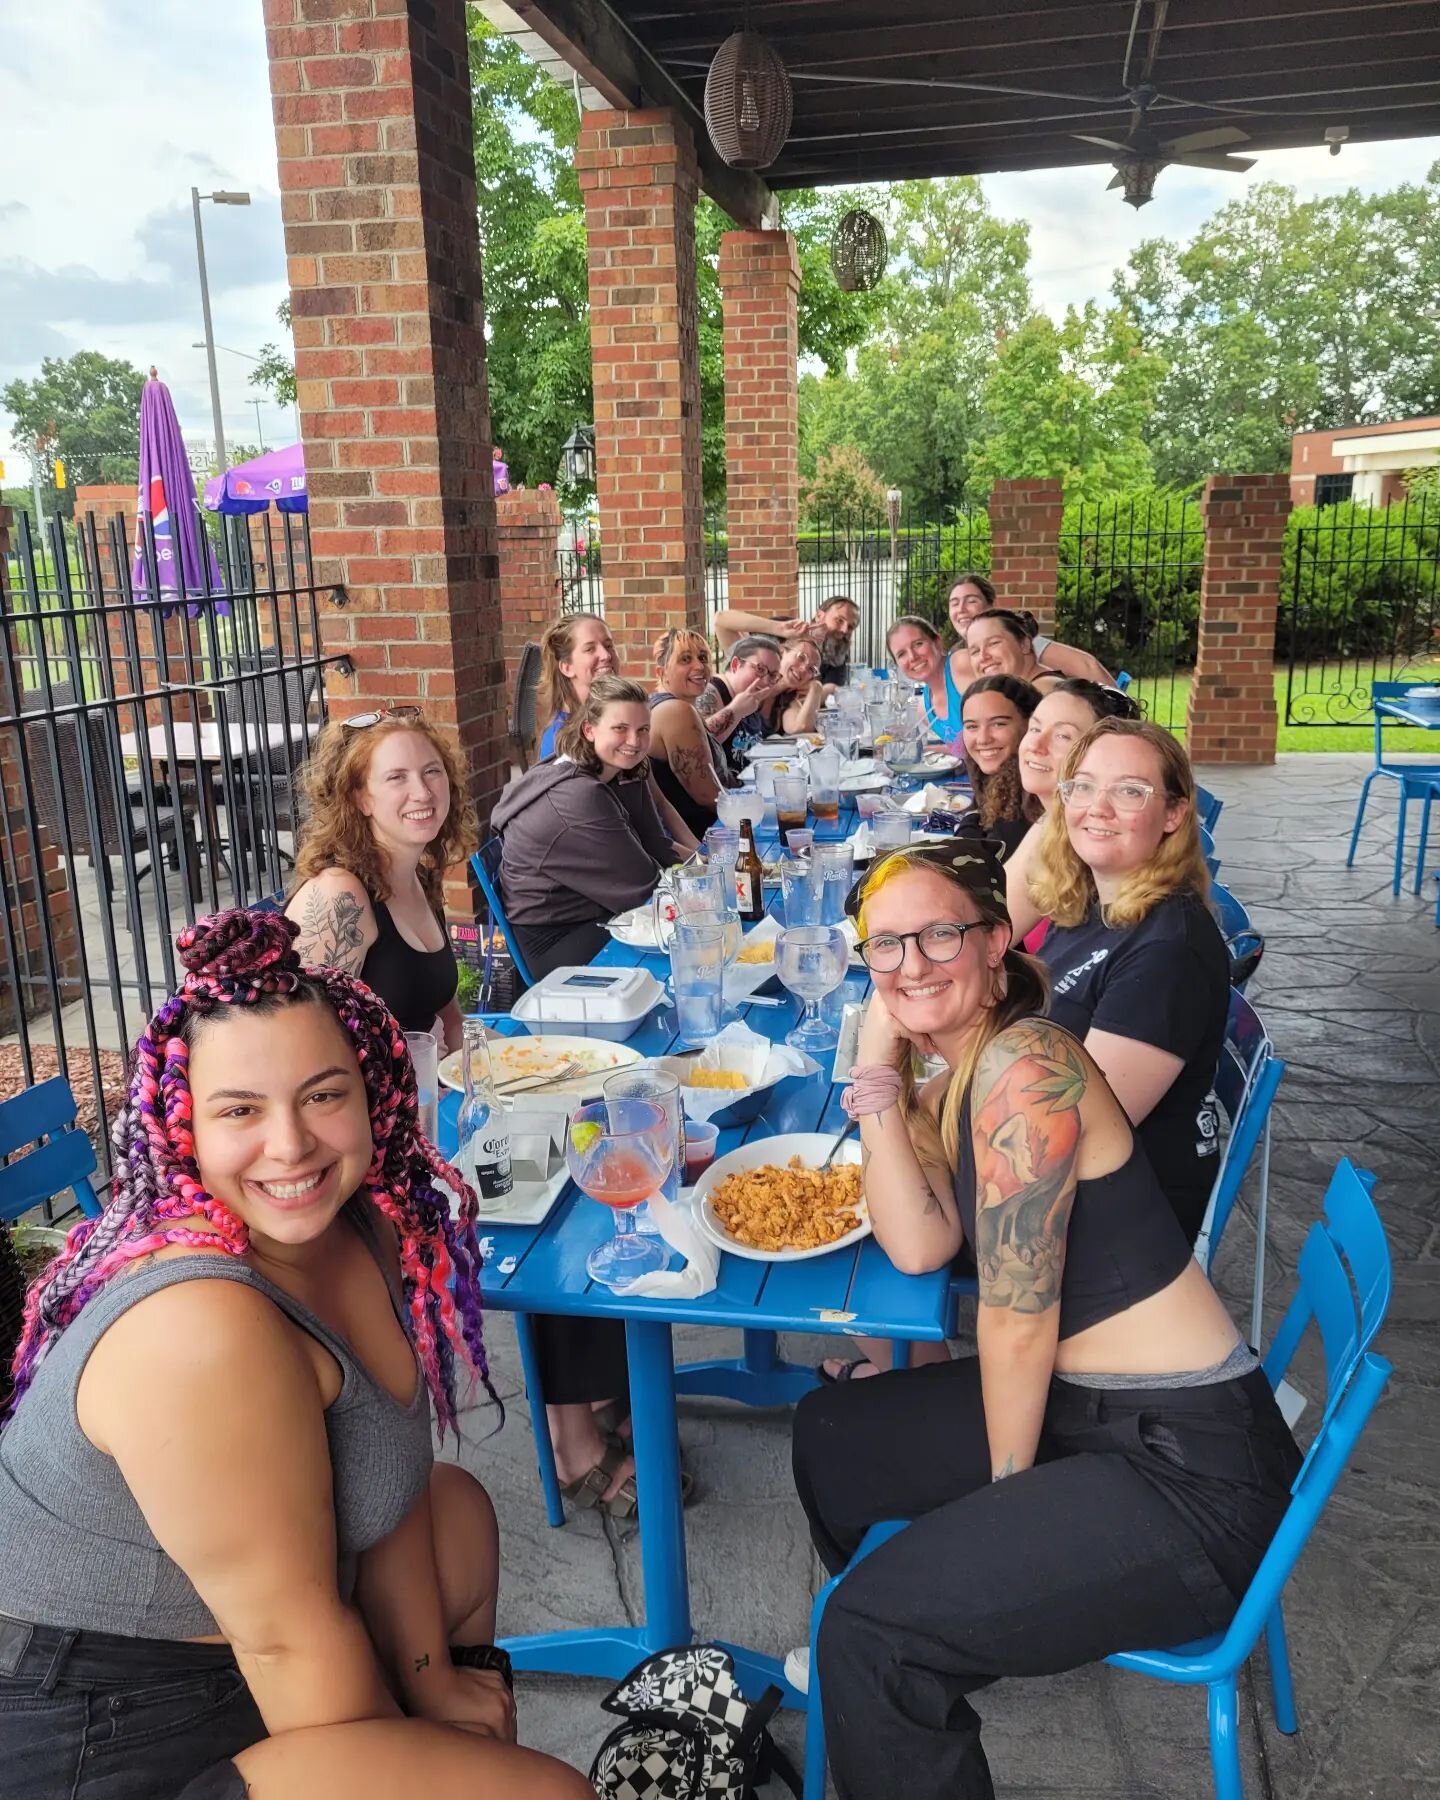 Post Practice Lunch to Replenish!

DM to be tagged 😁😁😁

Thank you to the @fridasmexgrill staff for the fantastic post practice lunch!! 

#GSORD #wftda #rollerderby #flattrack #postpractice #lunch #tacosundays #GSO #nc #skatelife #replenish